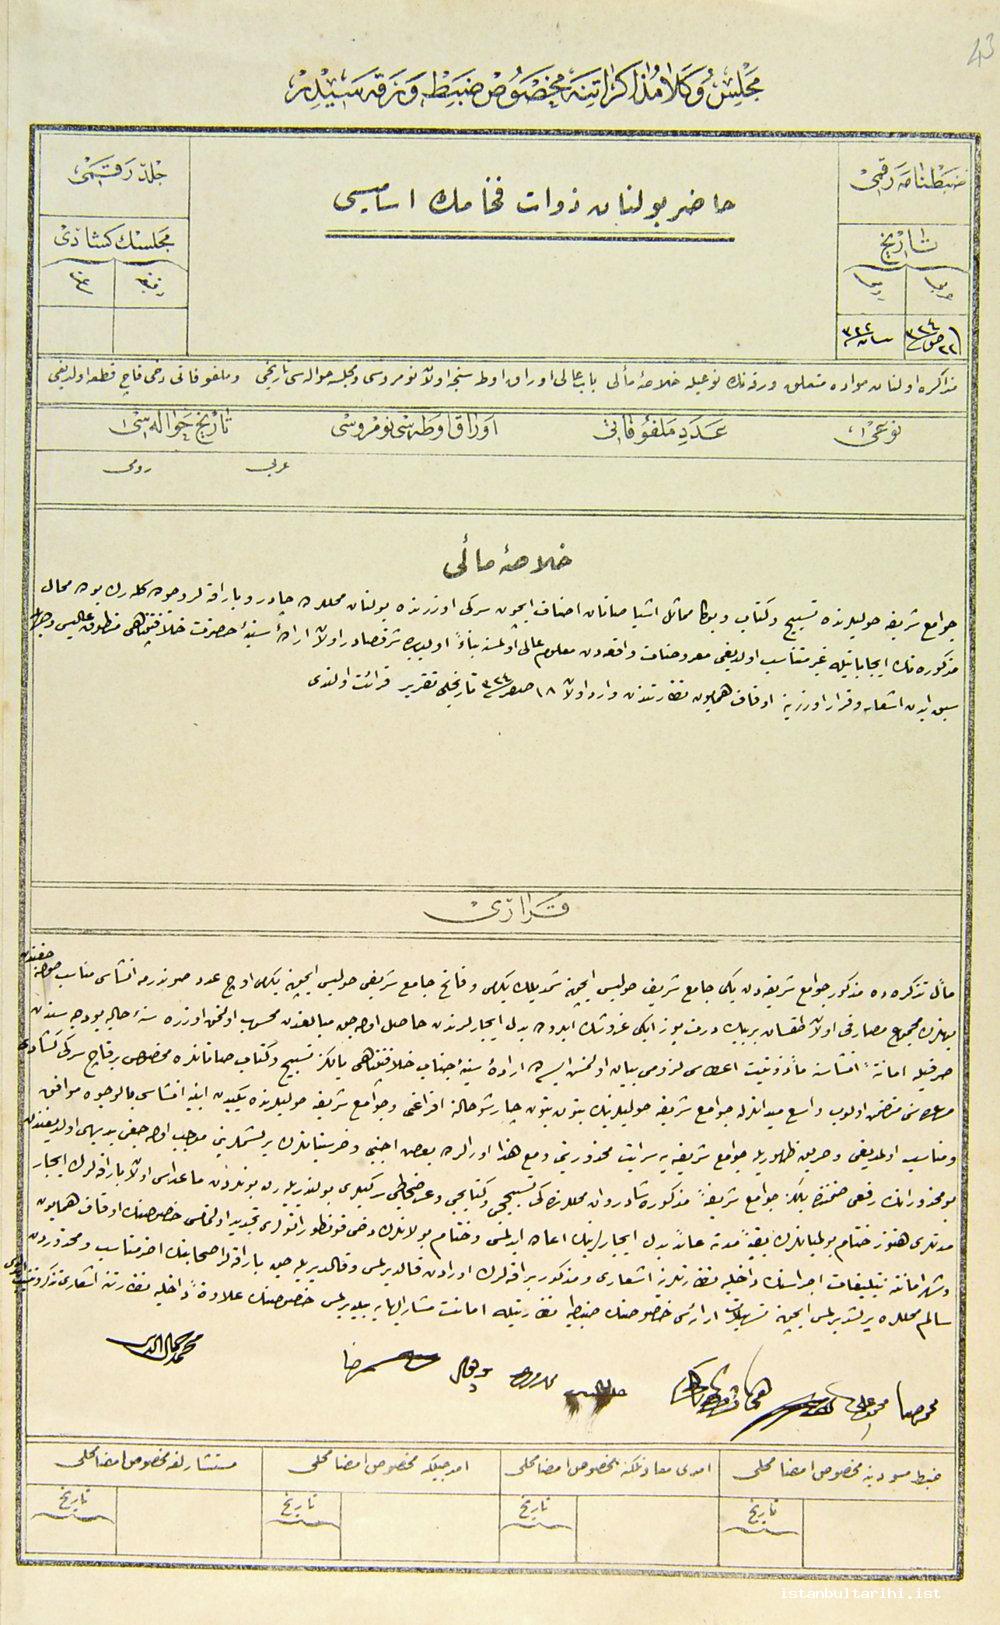 4- The decision of the cabinet dated 17 April 1906 about demolishing all the barracks founded in the yards of the mosques especially in the yards of Fatih and Yeni Mosques except the ones selling prayer beads and books (BOA, MV, no. 113/43)